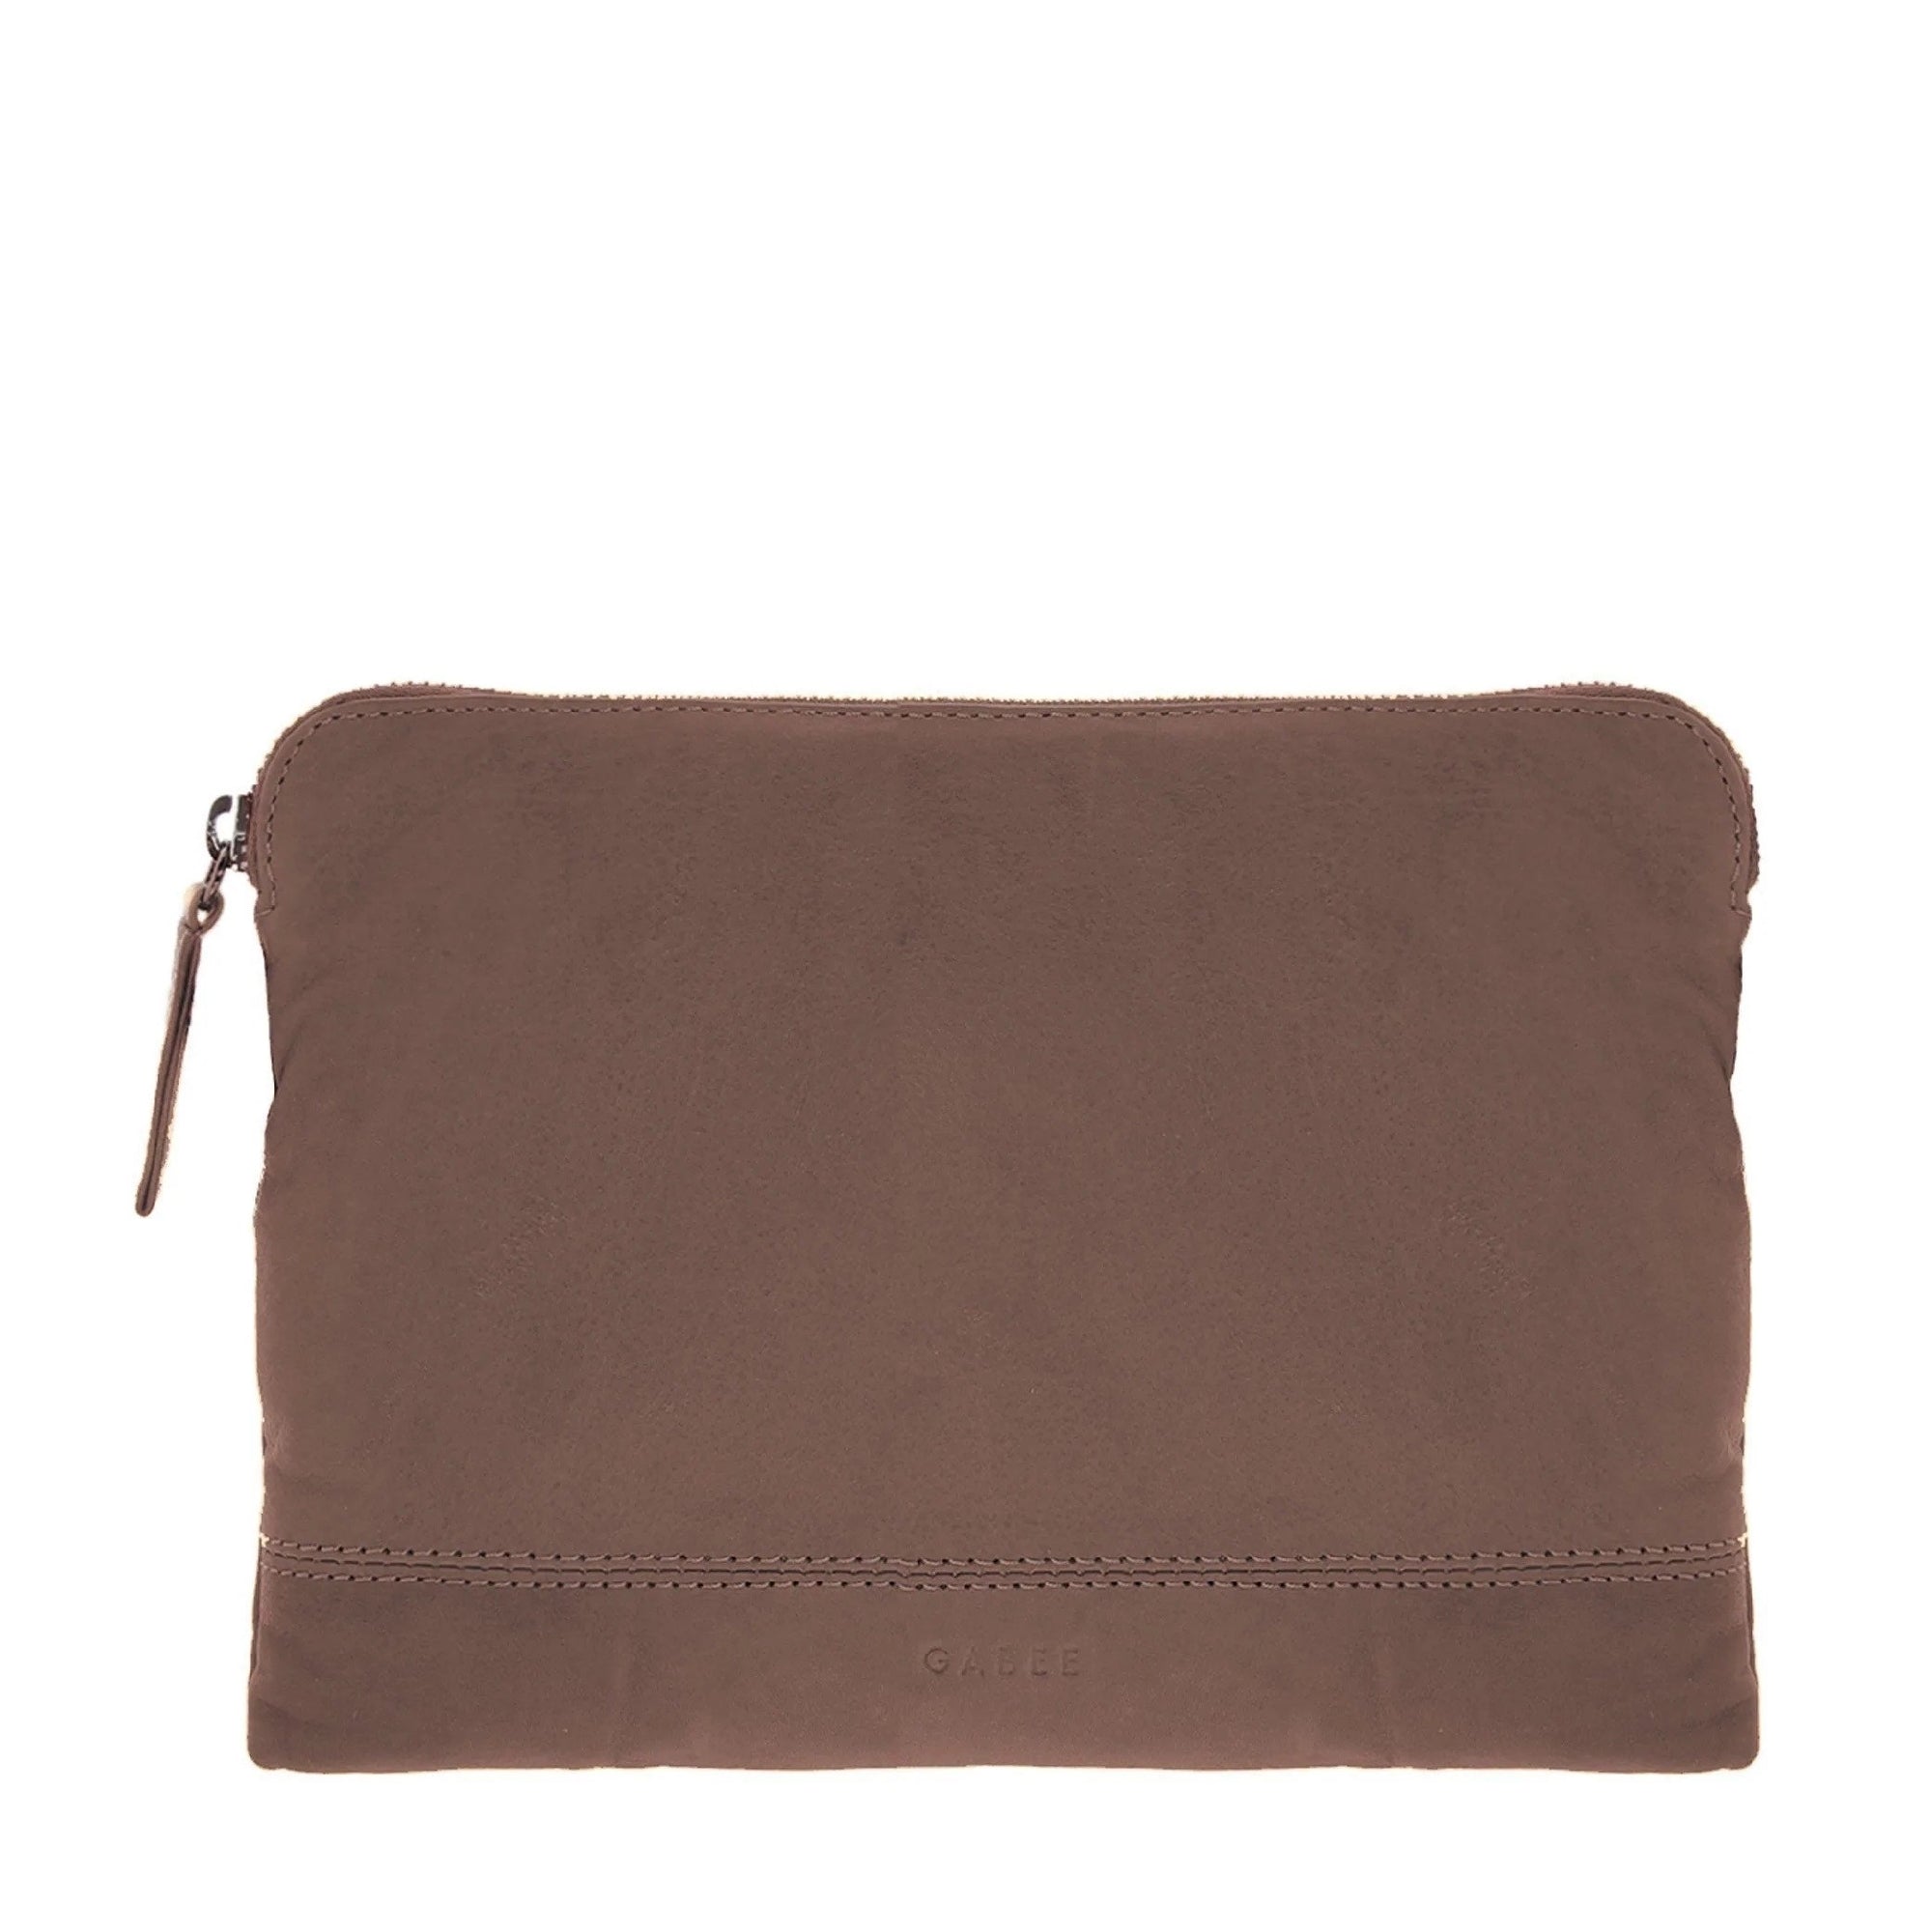 Gabee Amara Small Leather Pouch [COLOUR:Taupe]